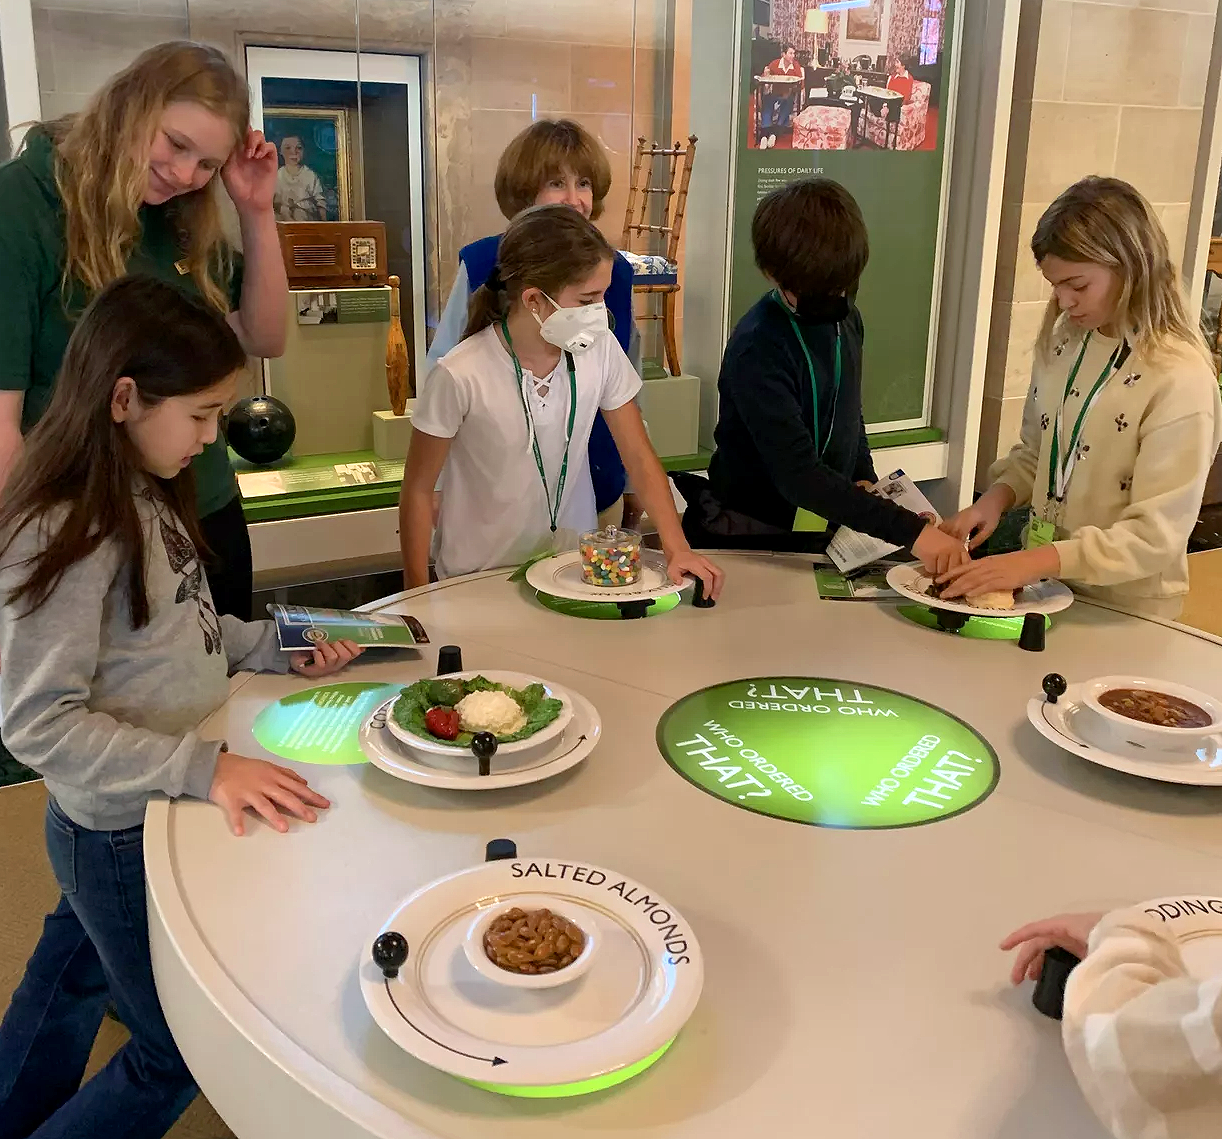 Children stand around a table while examining models of dishes and foods